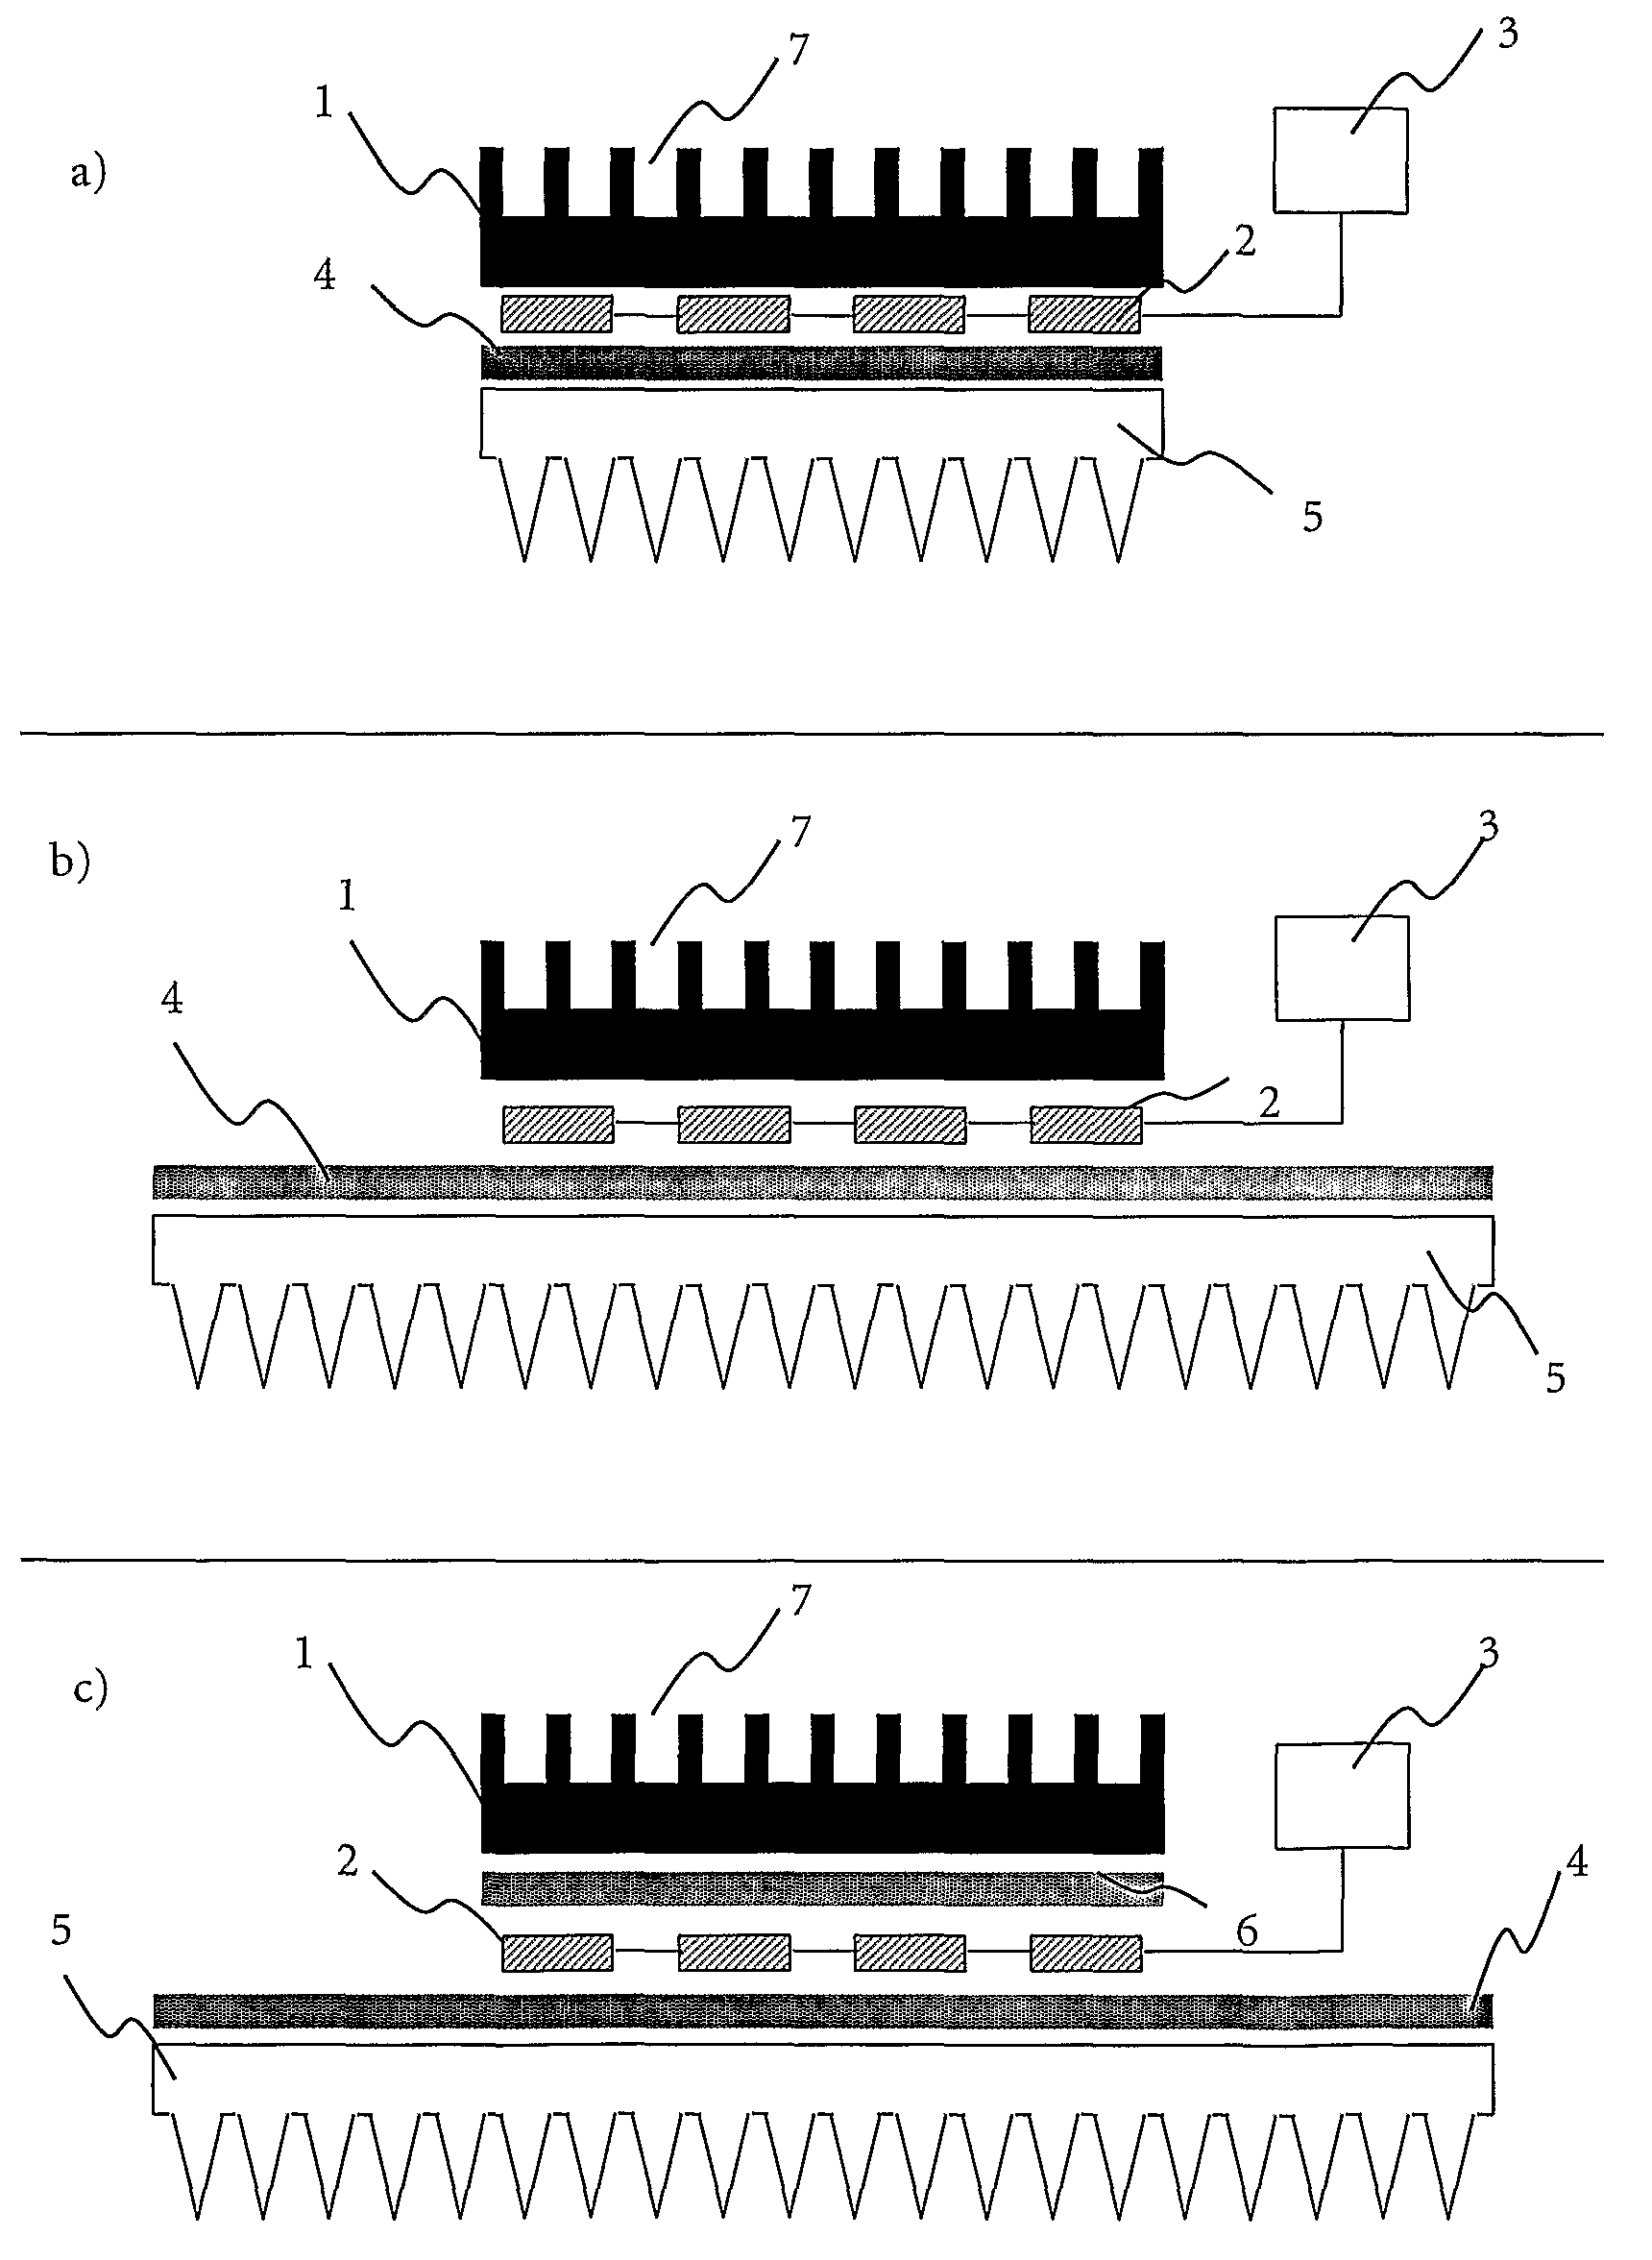 Thermocycling of a Block Comprising Multiple Sample